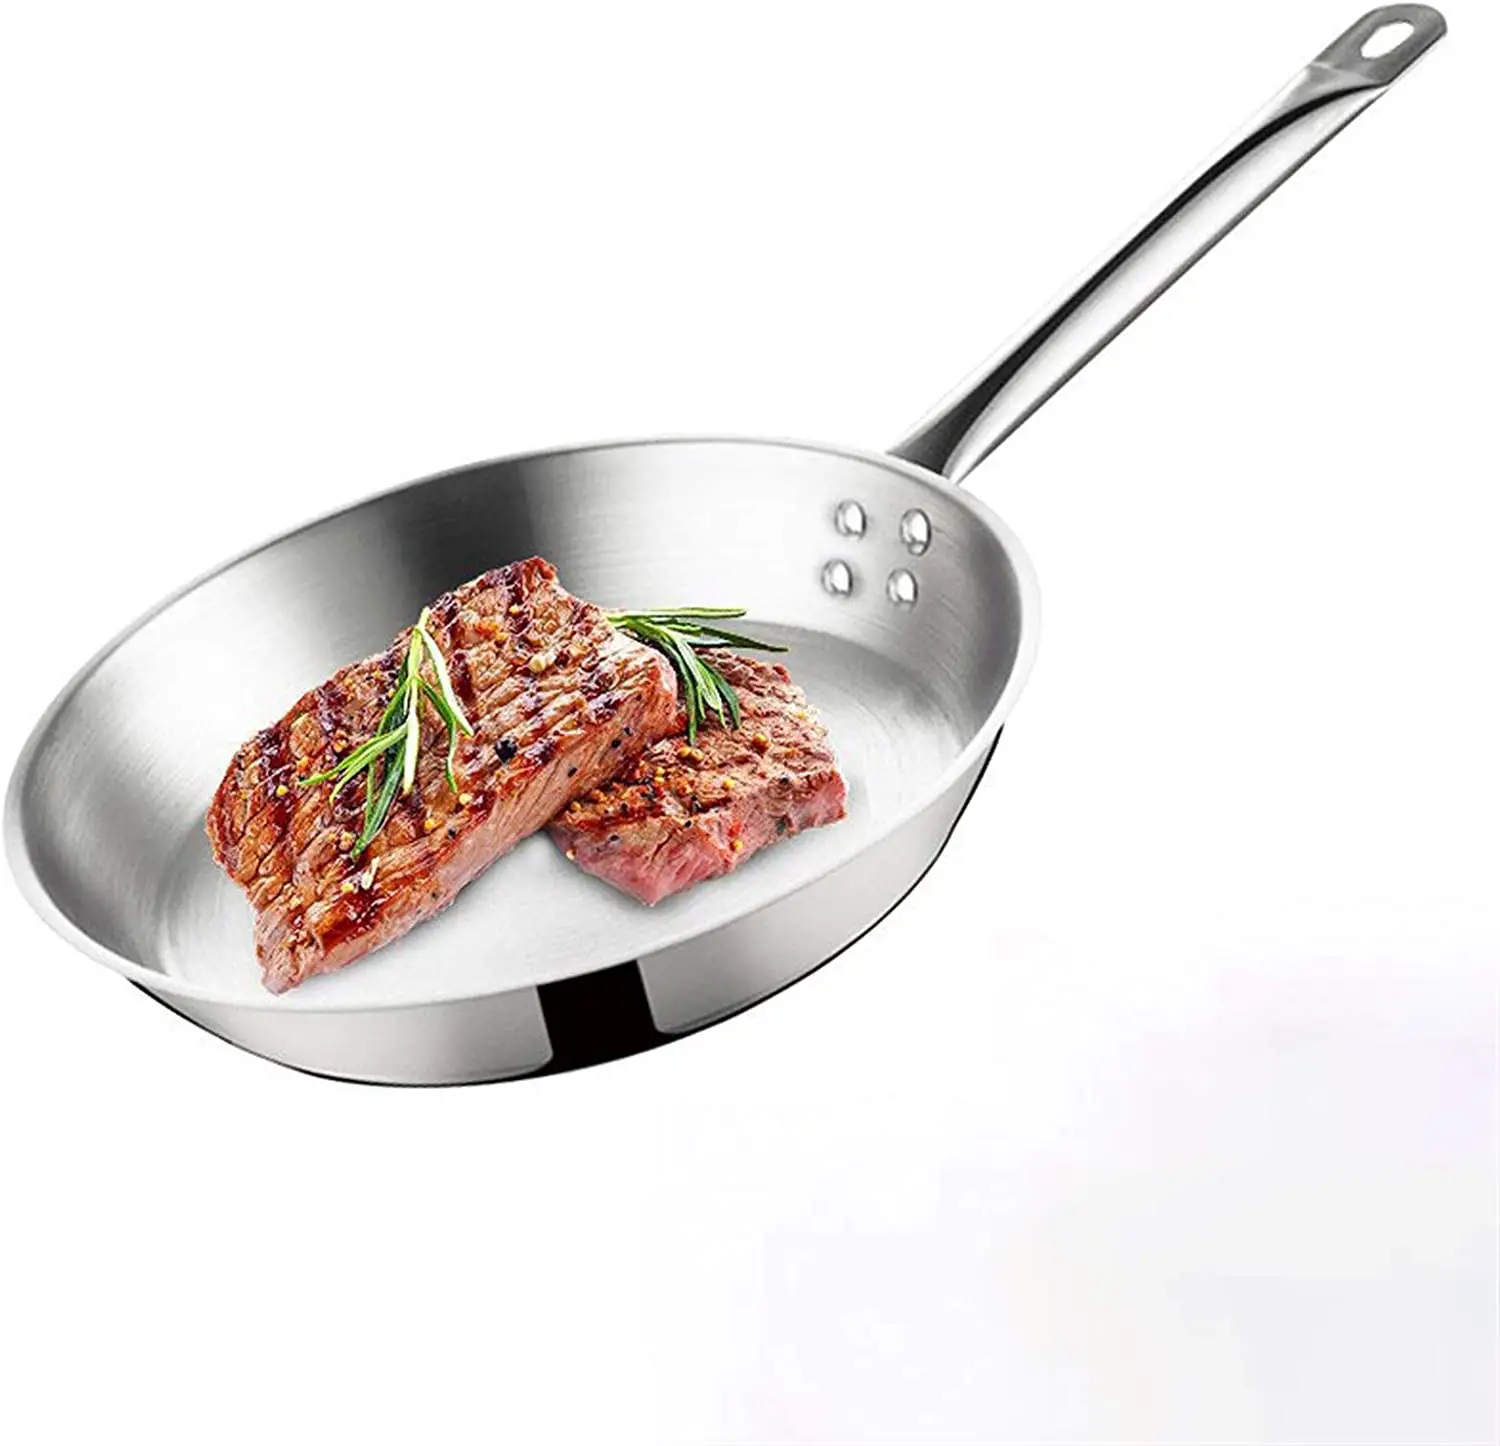 Amazon.com: KNMQZSQ Stainless Steel Composite Bottom Frying Pan, Non ...